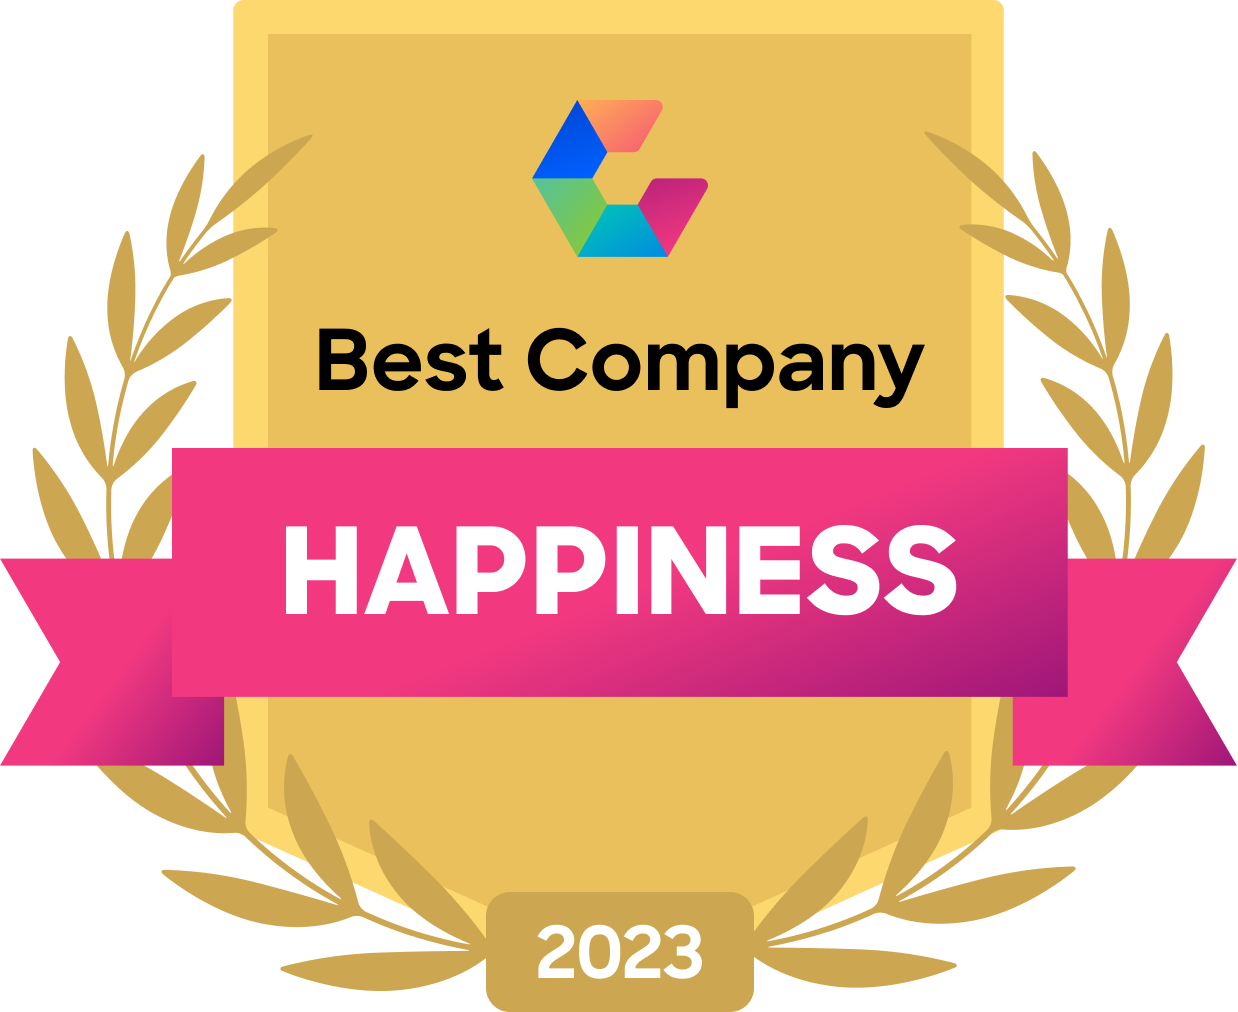 Best Company Happiness 2023